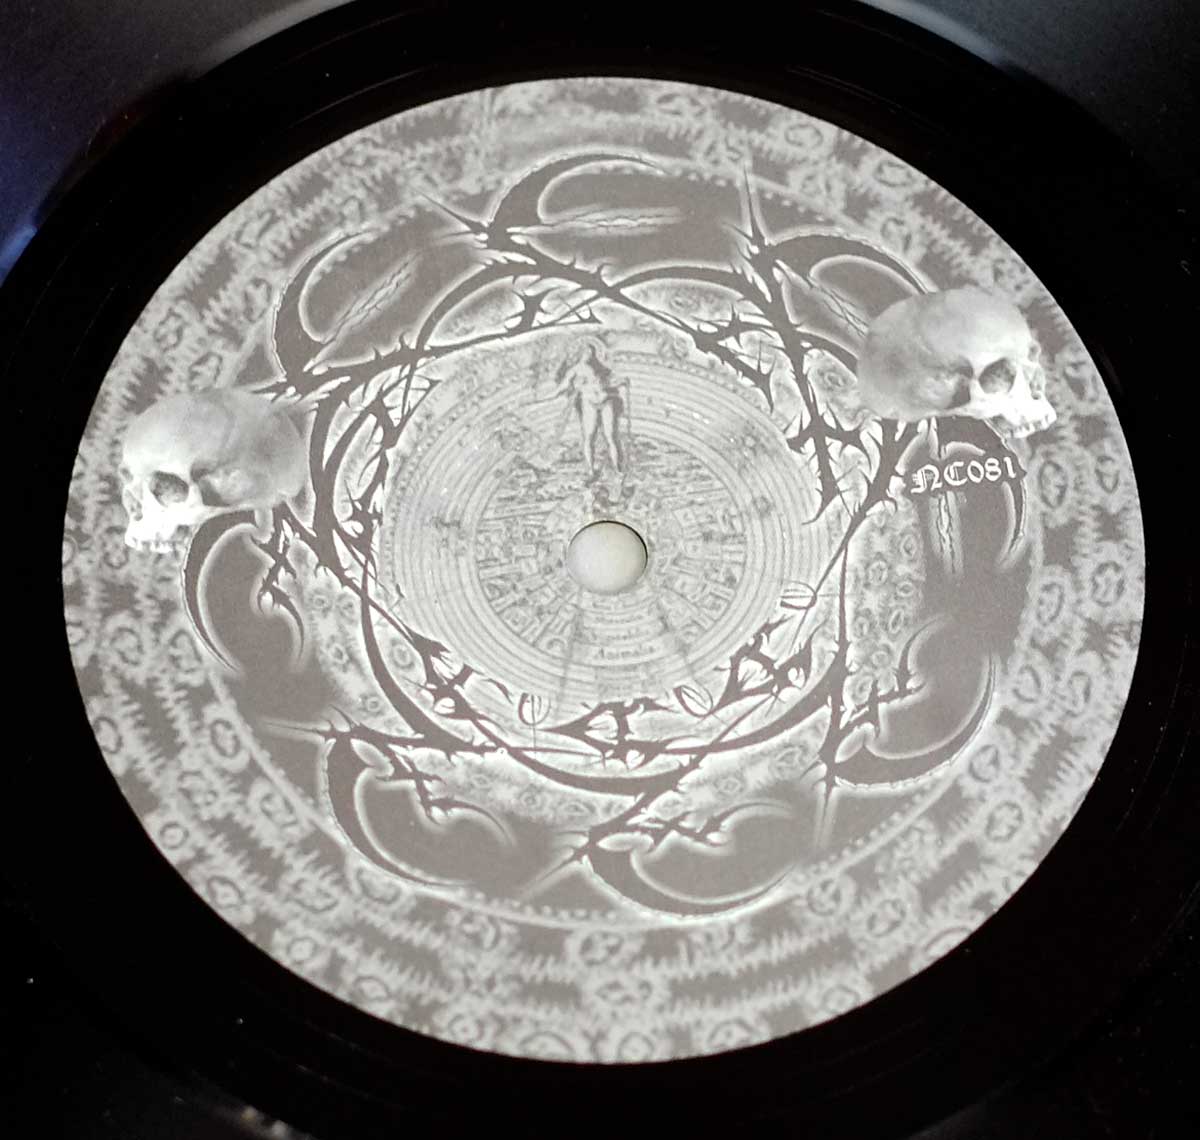 Close-up on the Illustration on the record label  